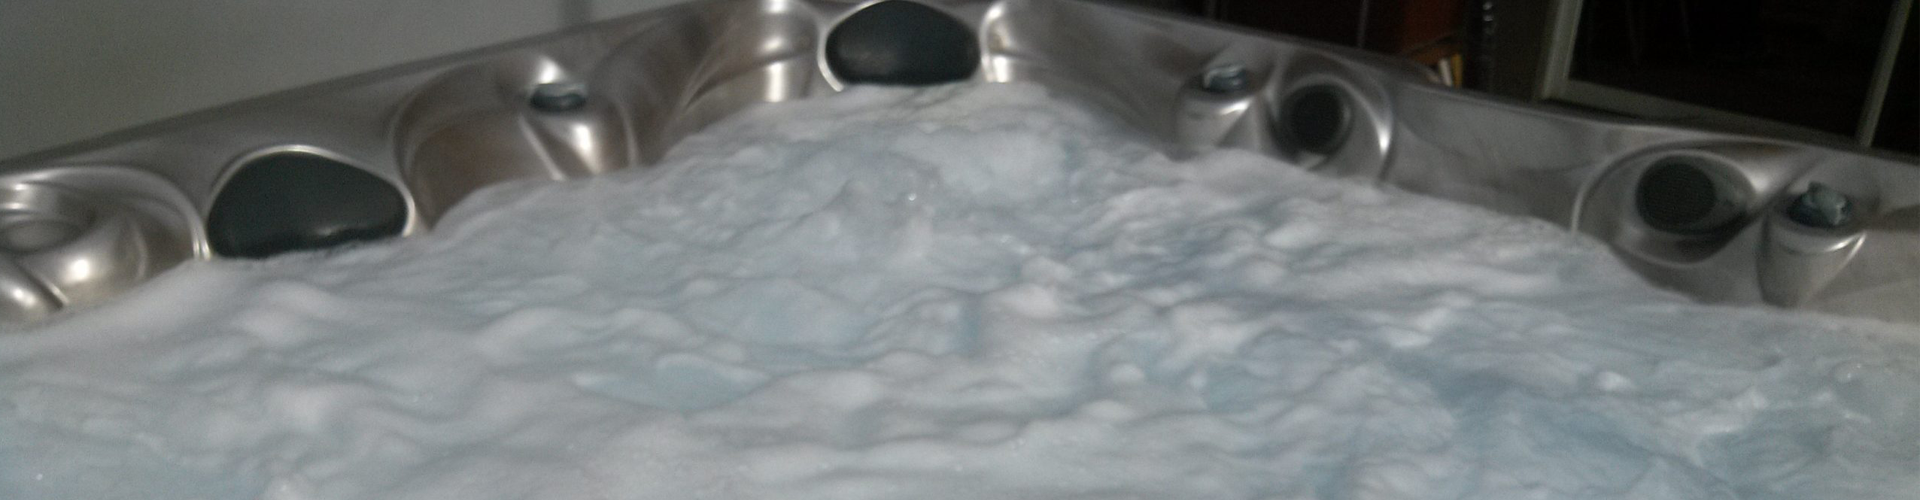 Don’t Be Fooled: Foamy Hot Tubs Are No Joke